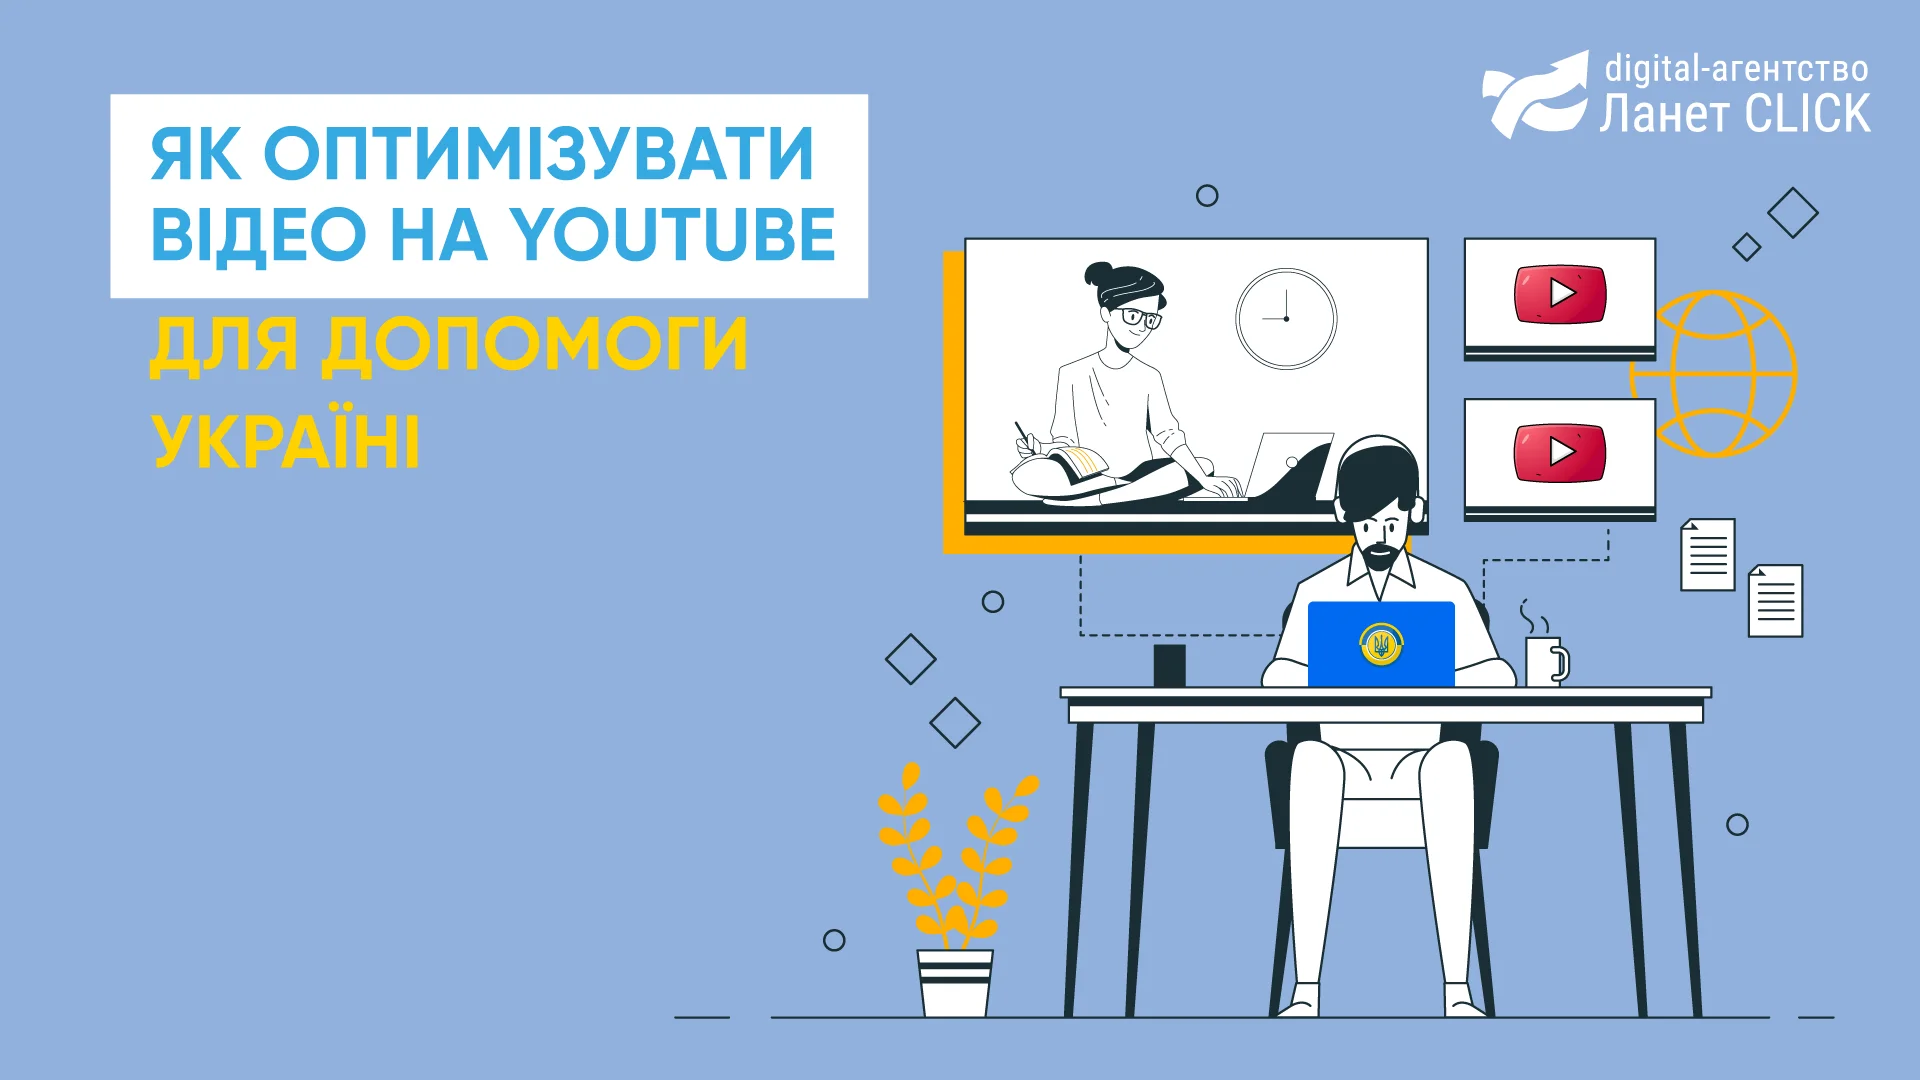 How to optimize YouTube videos to help Ukraine